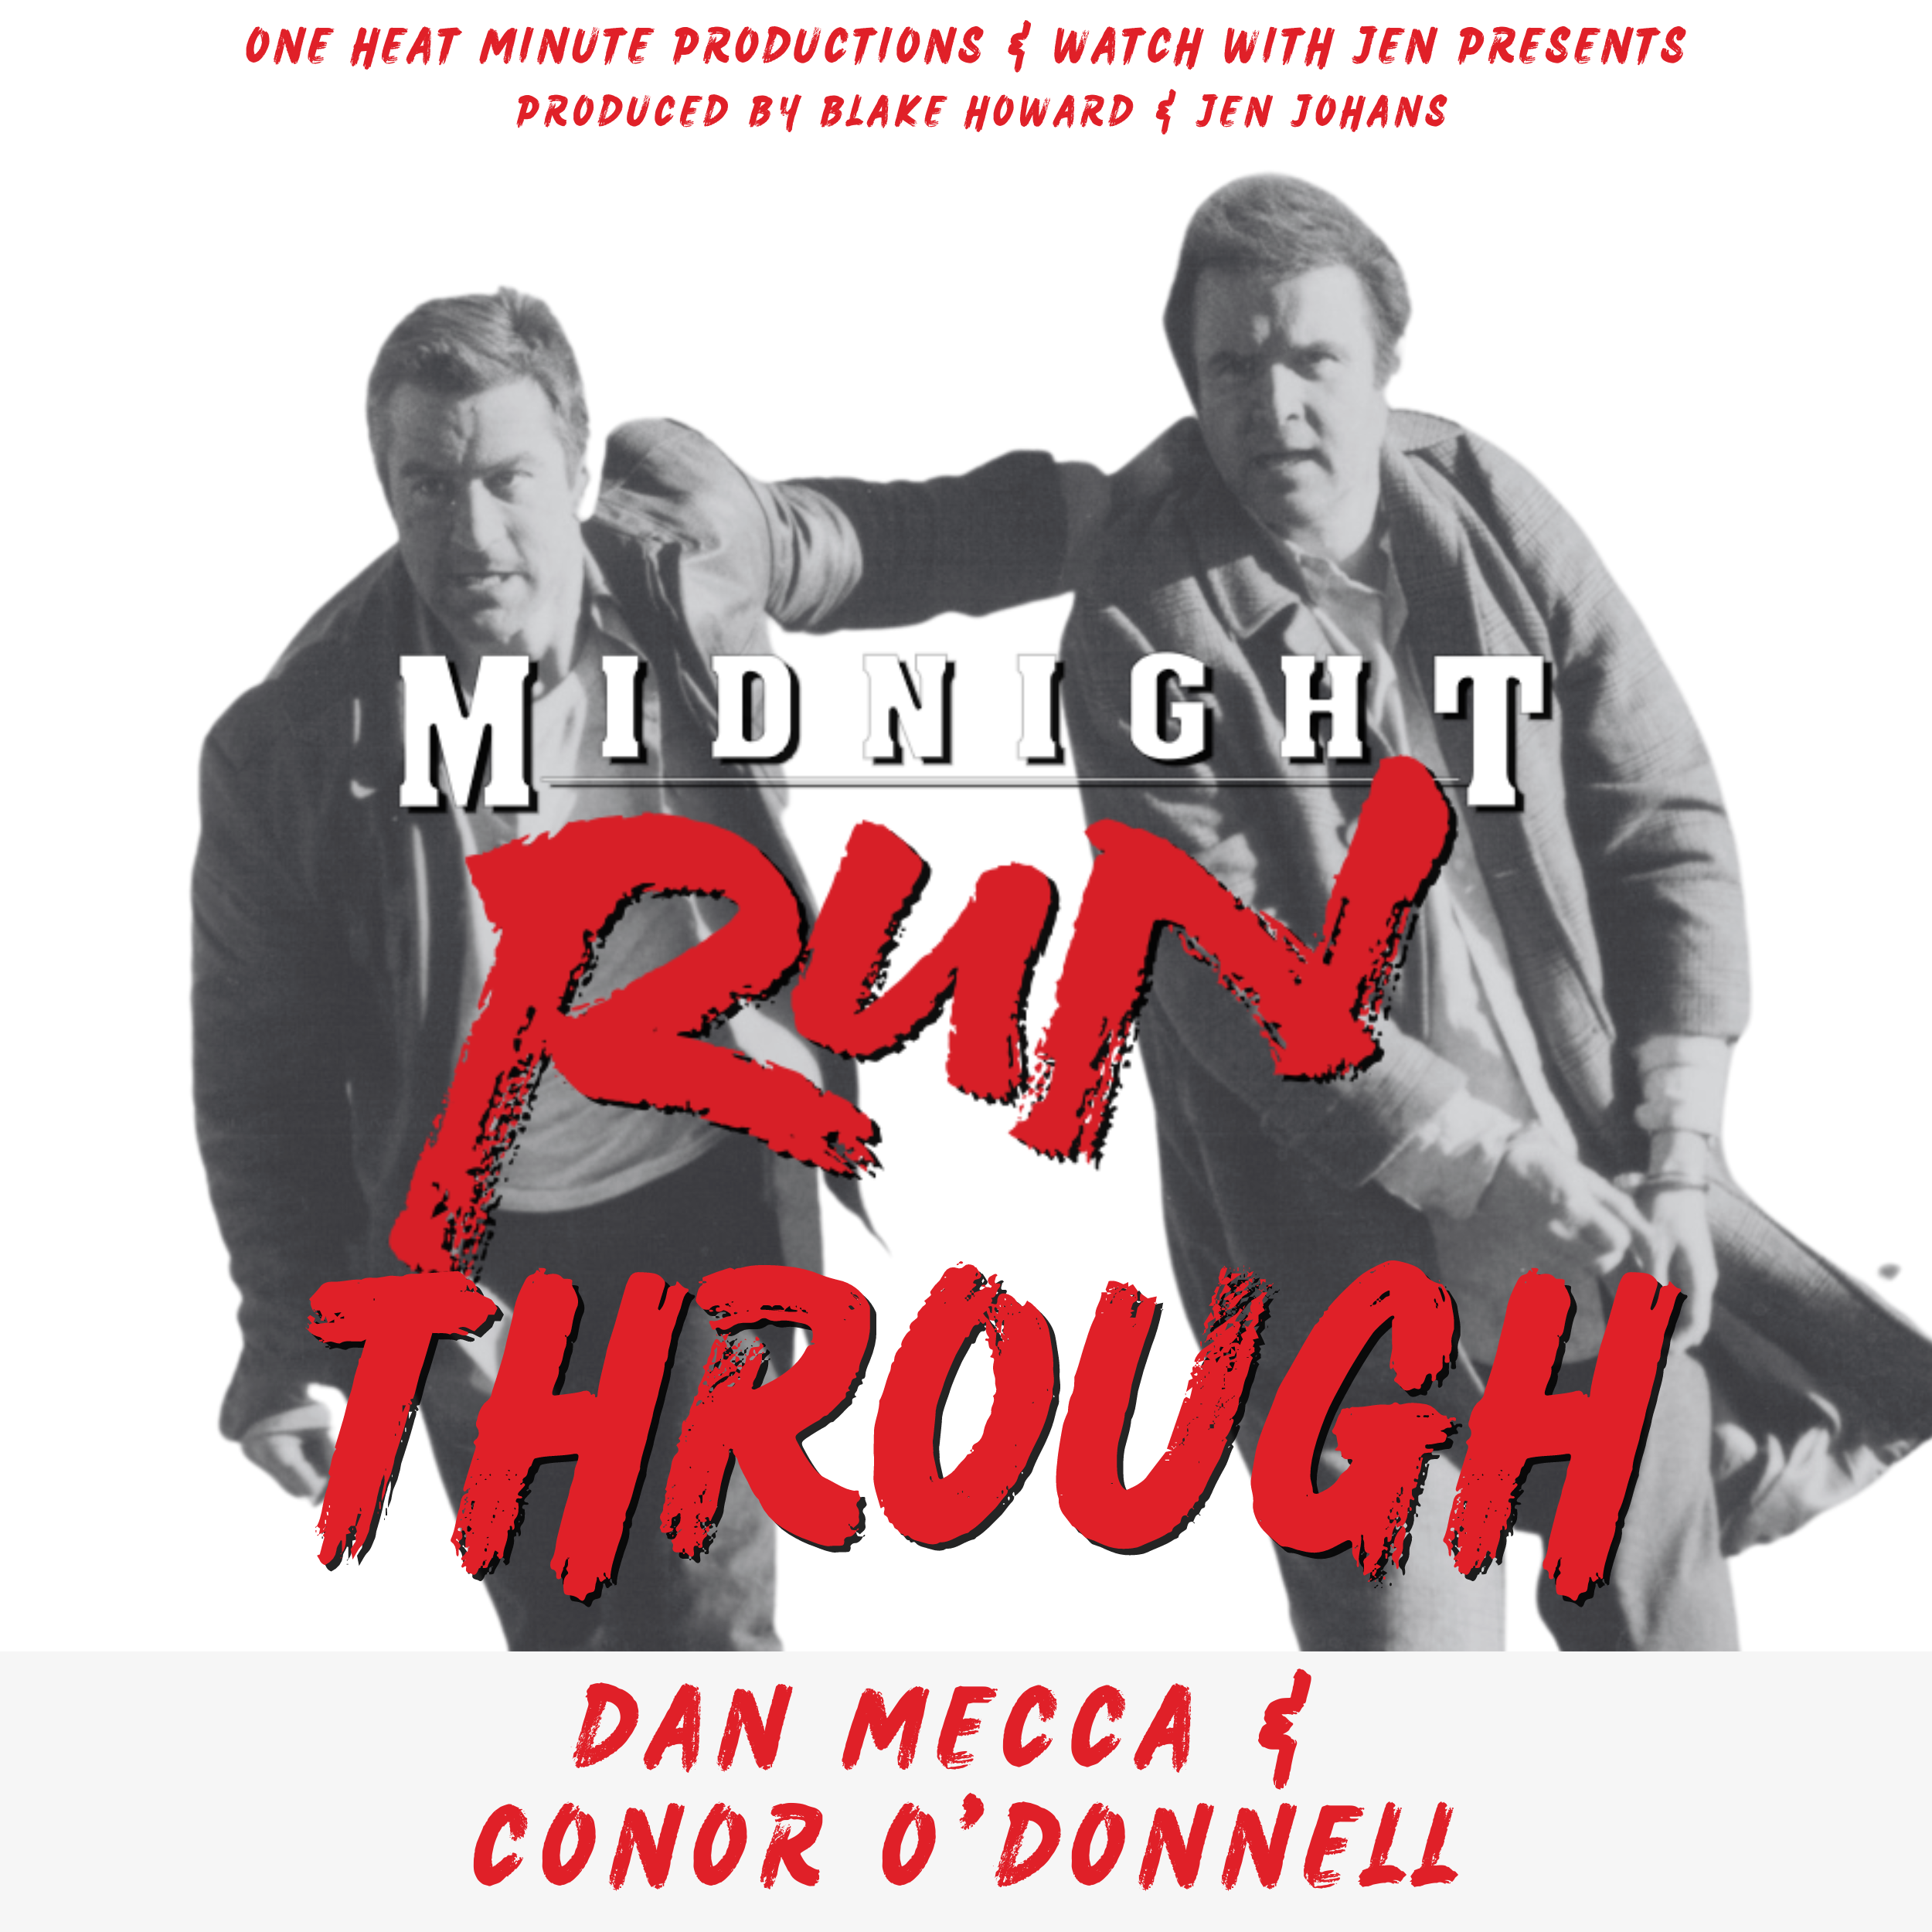 MIDNIGHT RUN-THROUGH - Episode 9 with Dan Mecca & Conor O’Donnell (From One Heat Minute Productions & Watch With Jen)